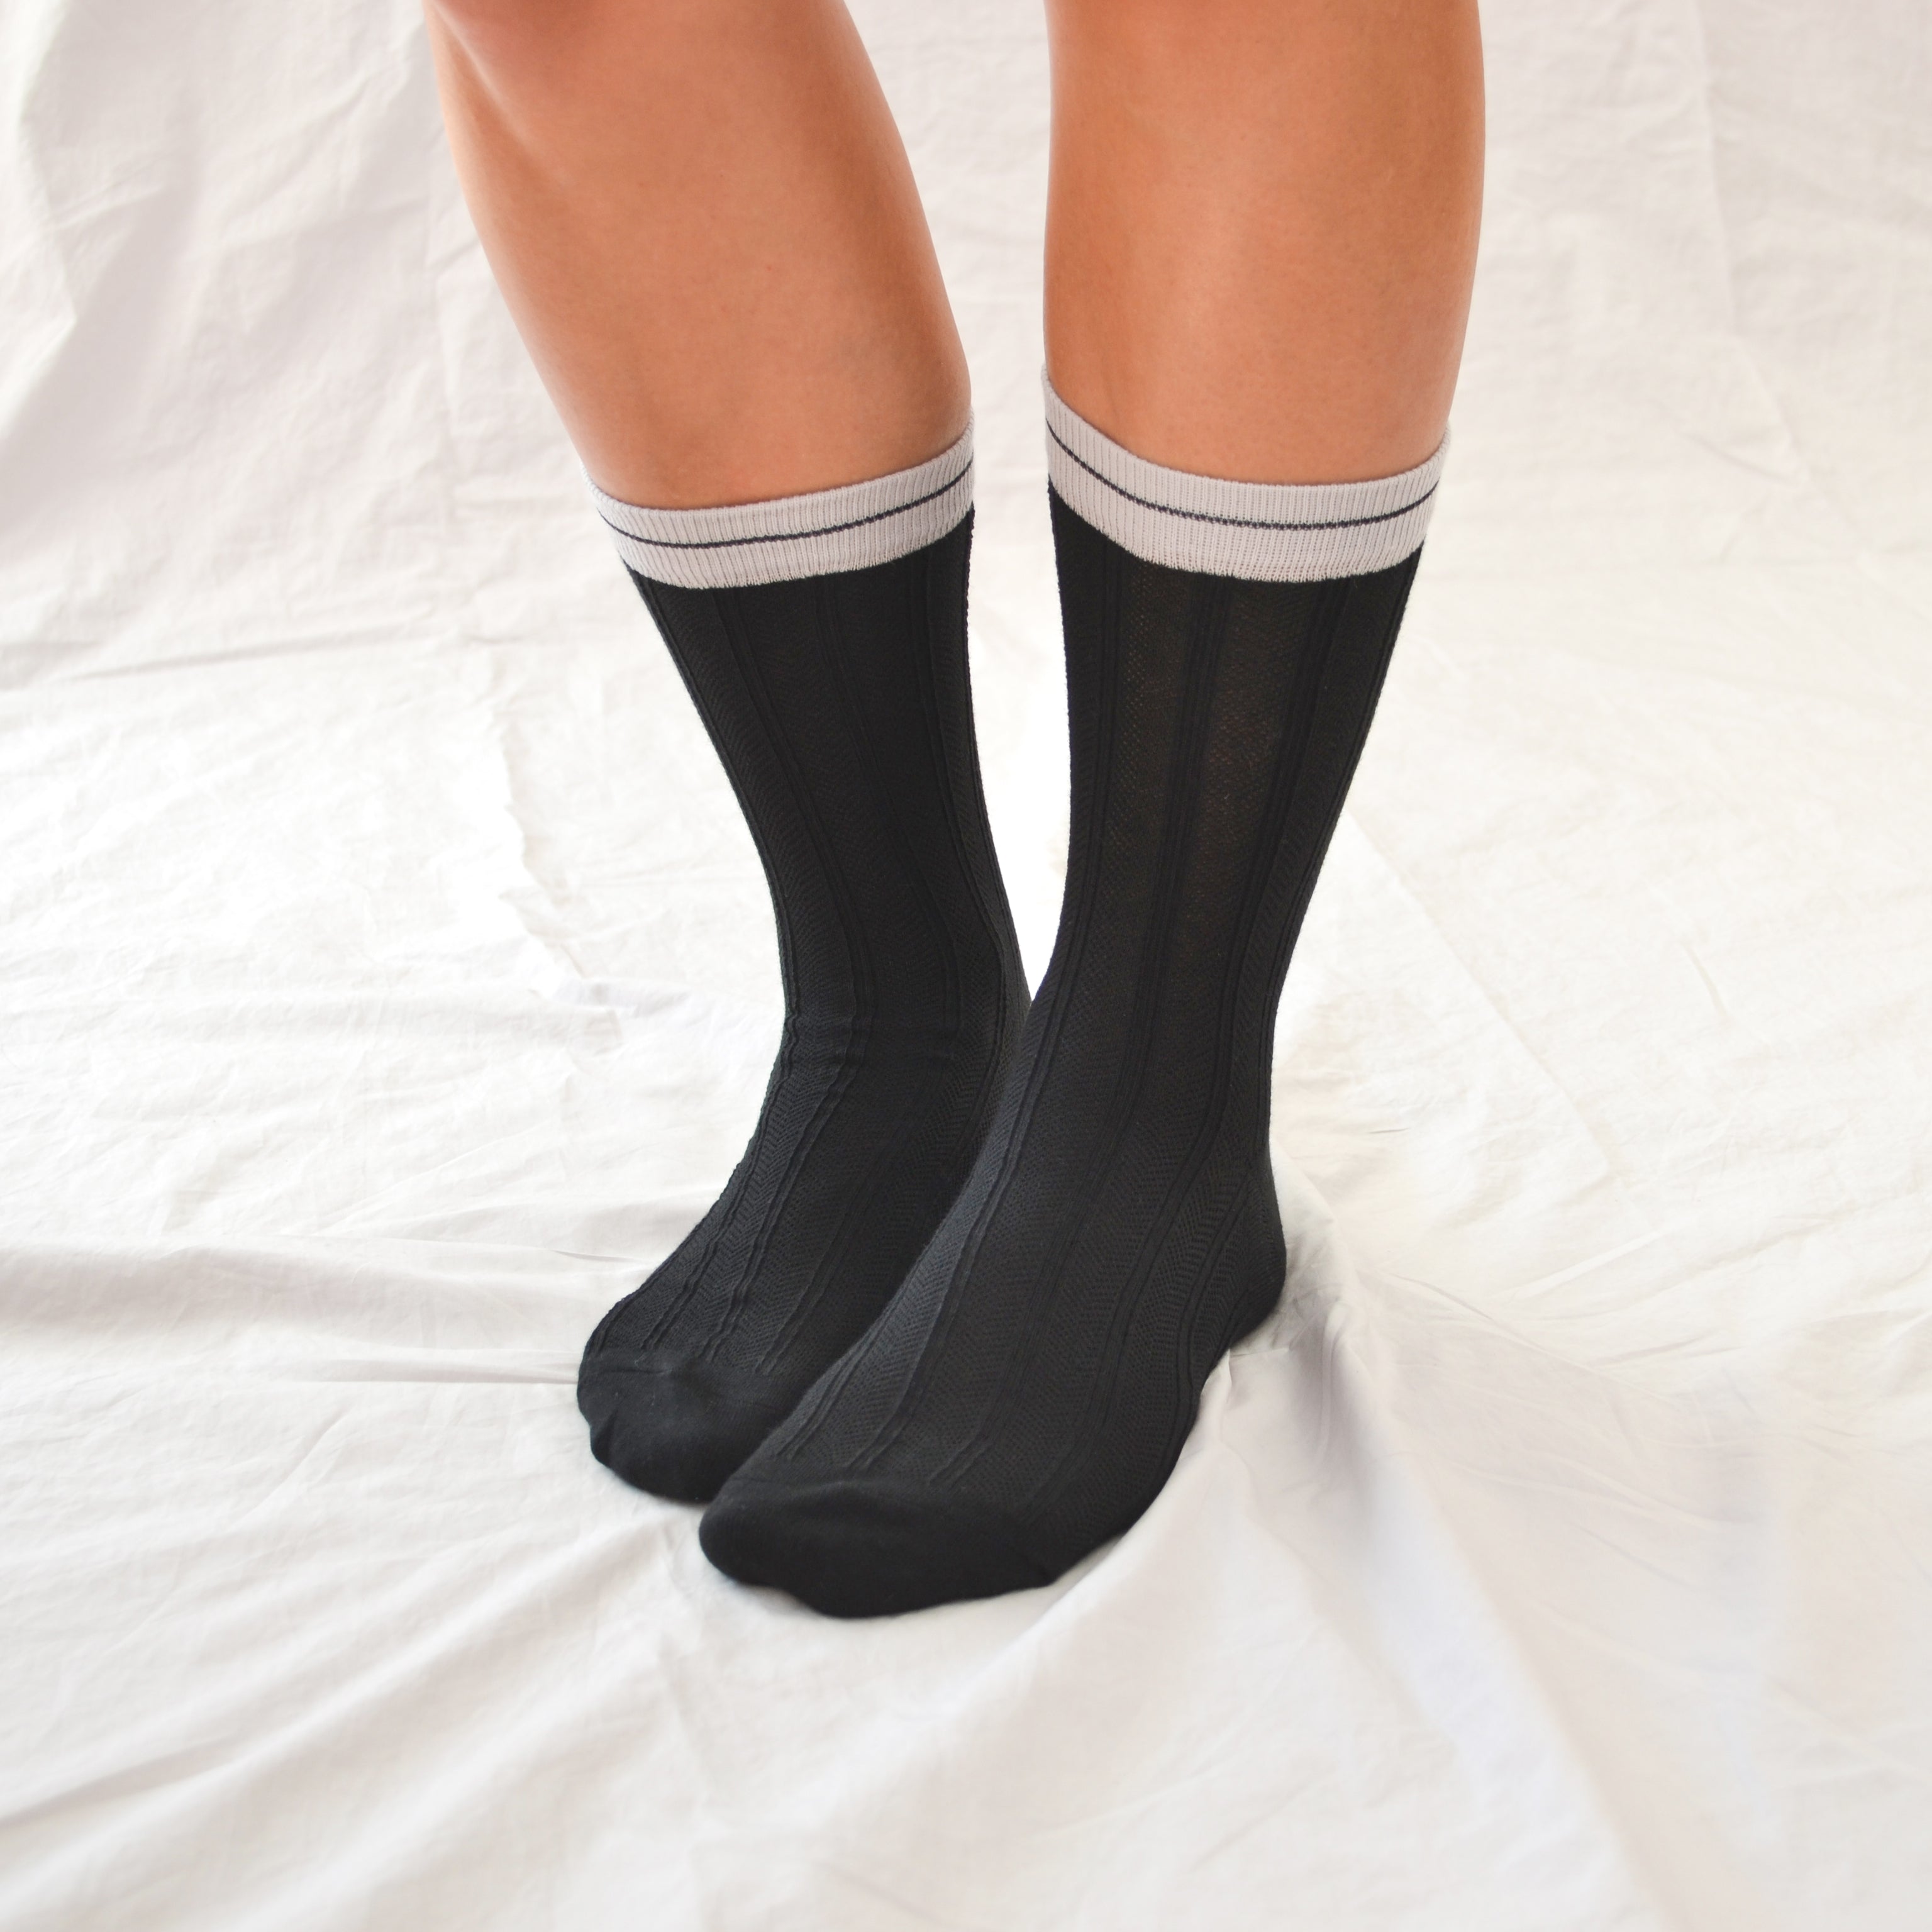 Union mid-crew socks – a charming blend of cuteness and classiness in stylish Blue and timeless Black. Size: Small (US women’s shoe size: 4-8)